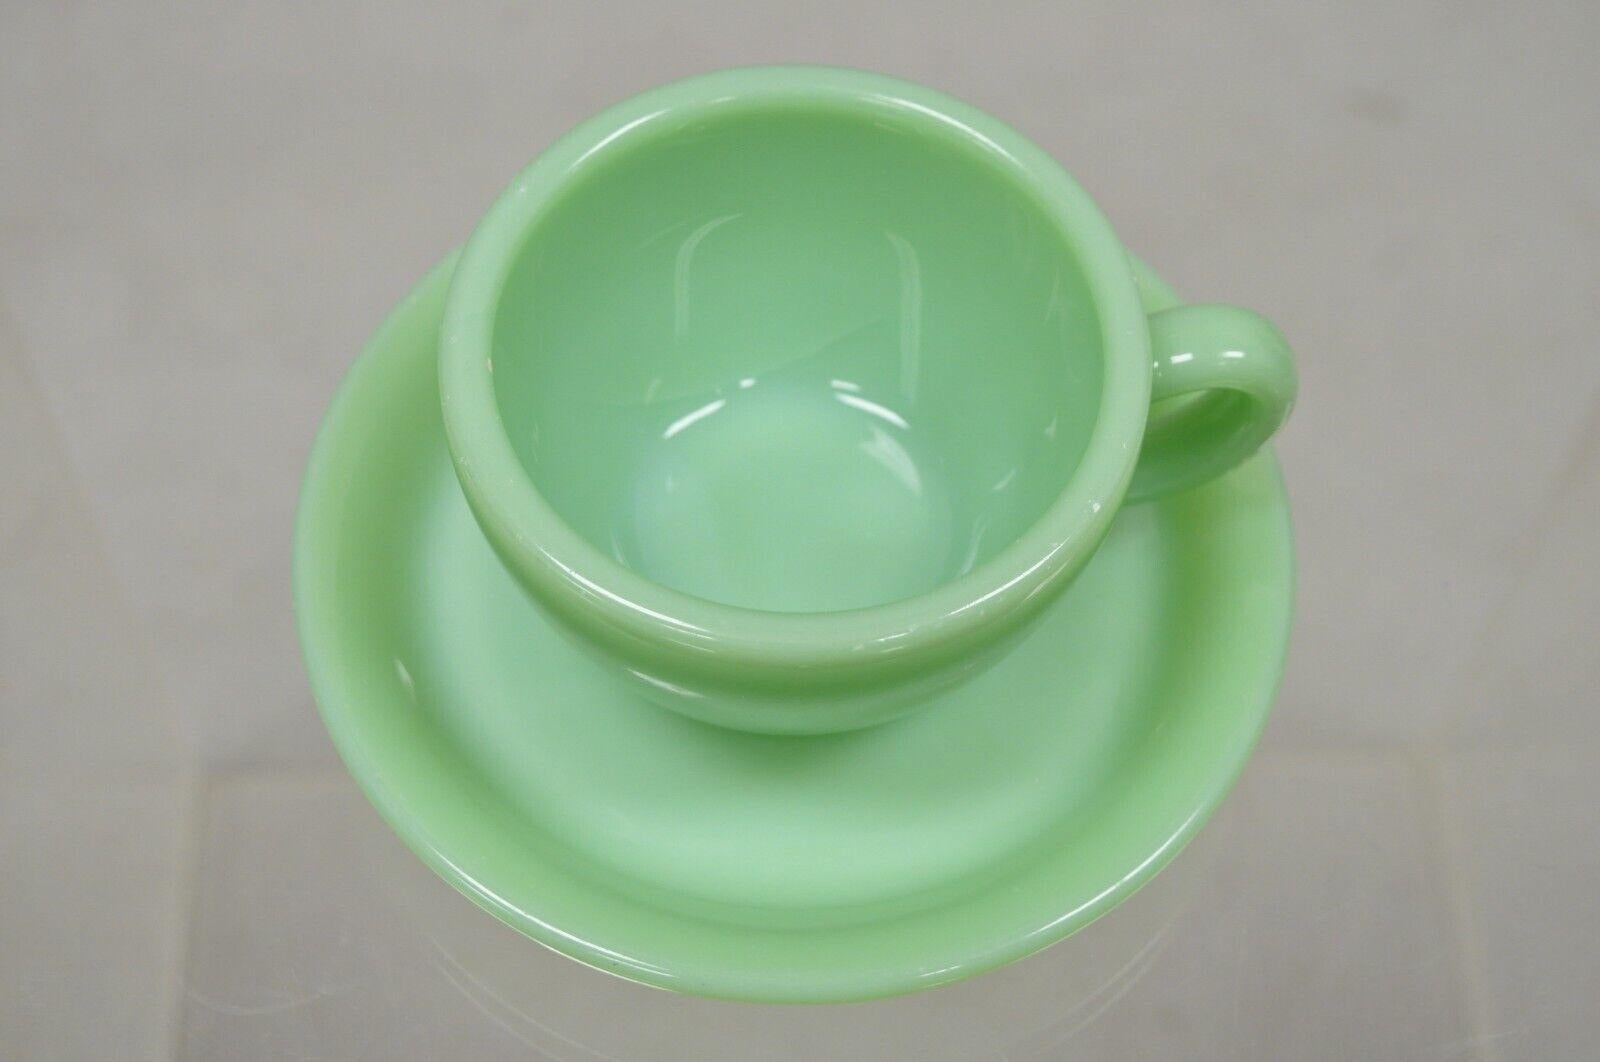 Vintage Fire King Jadeite Green Oven Ware Coffee Cup and Saucer with Damage 1